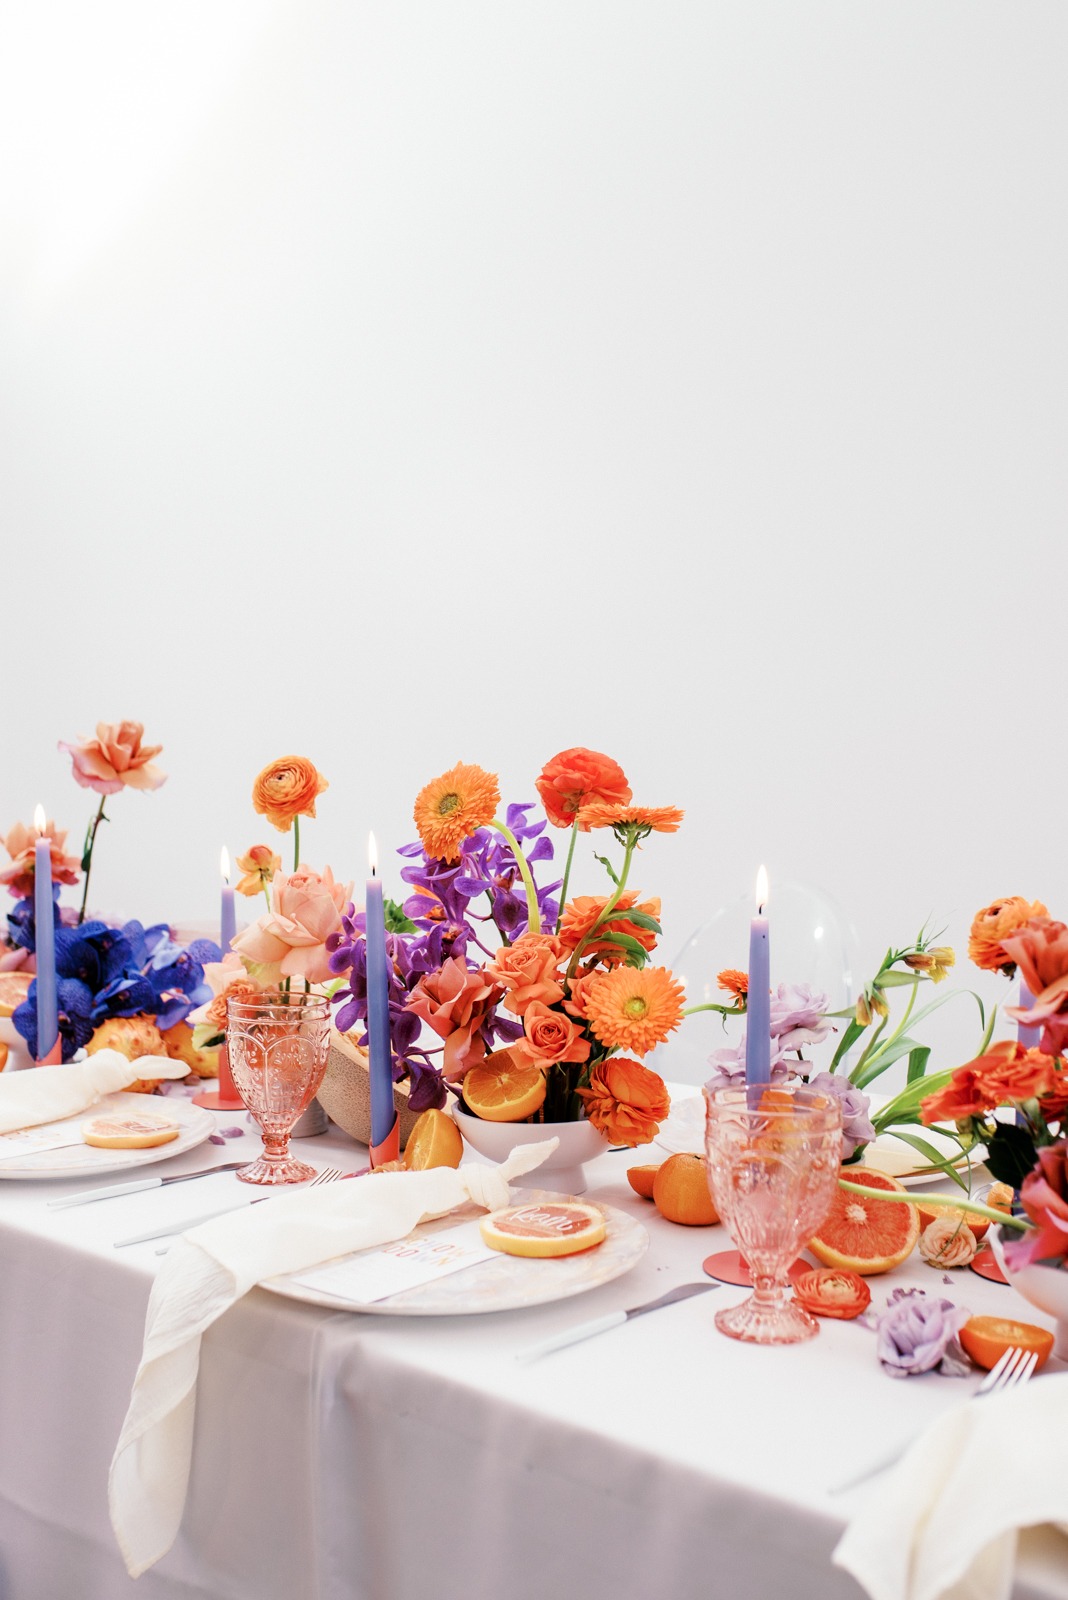 Reception centerpieces with fruit